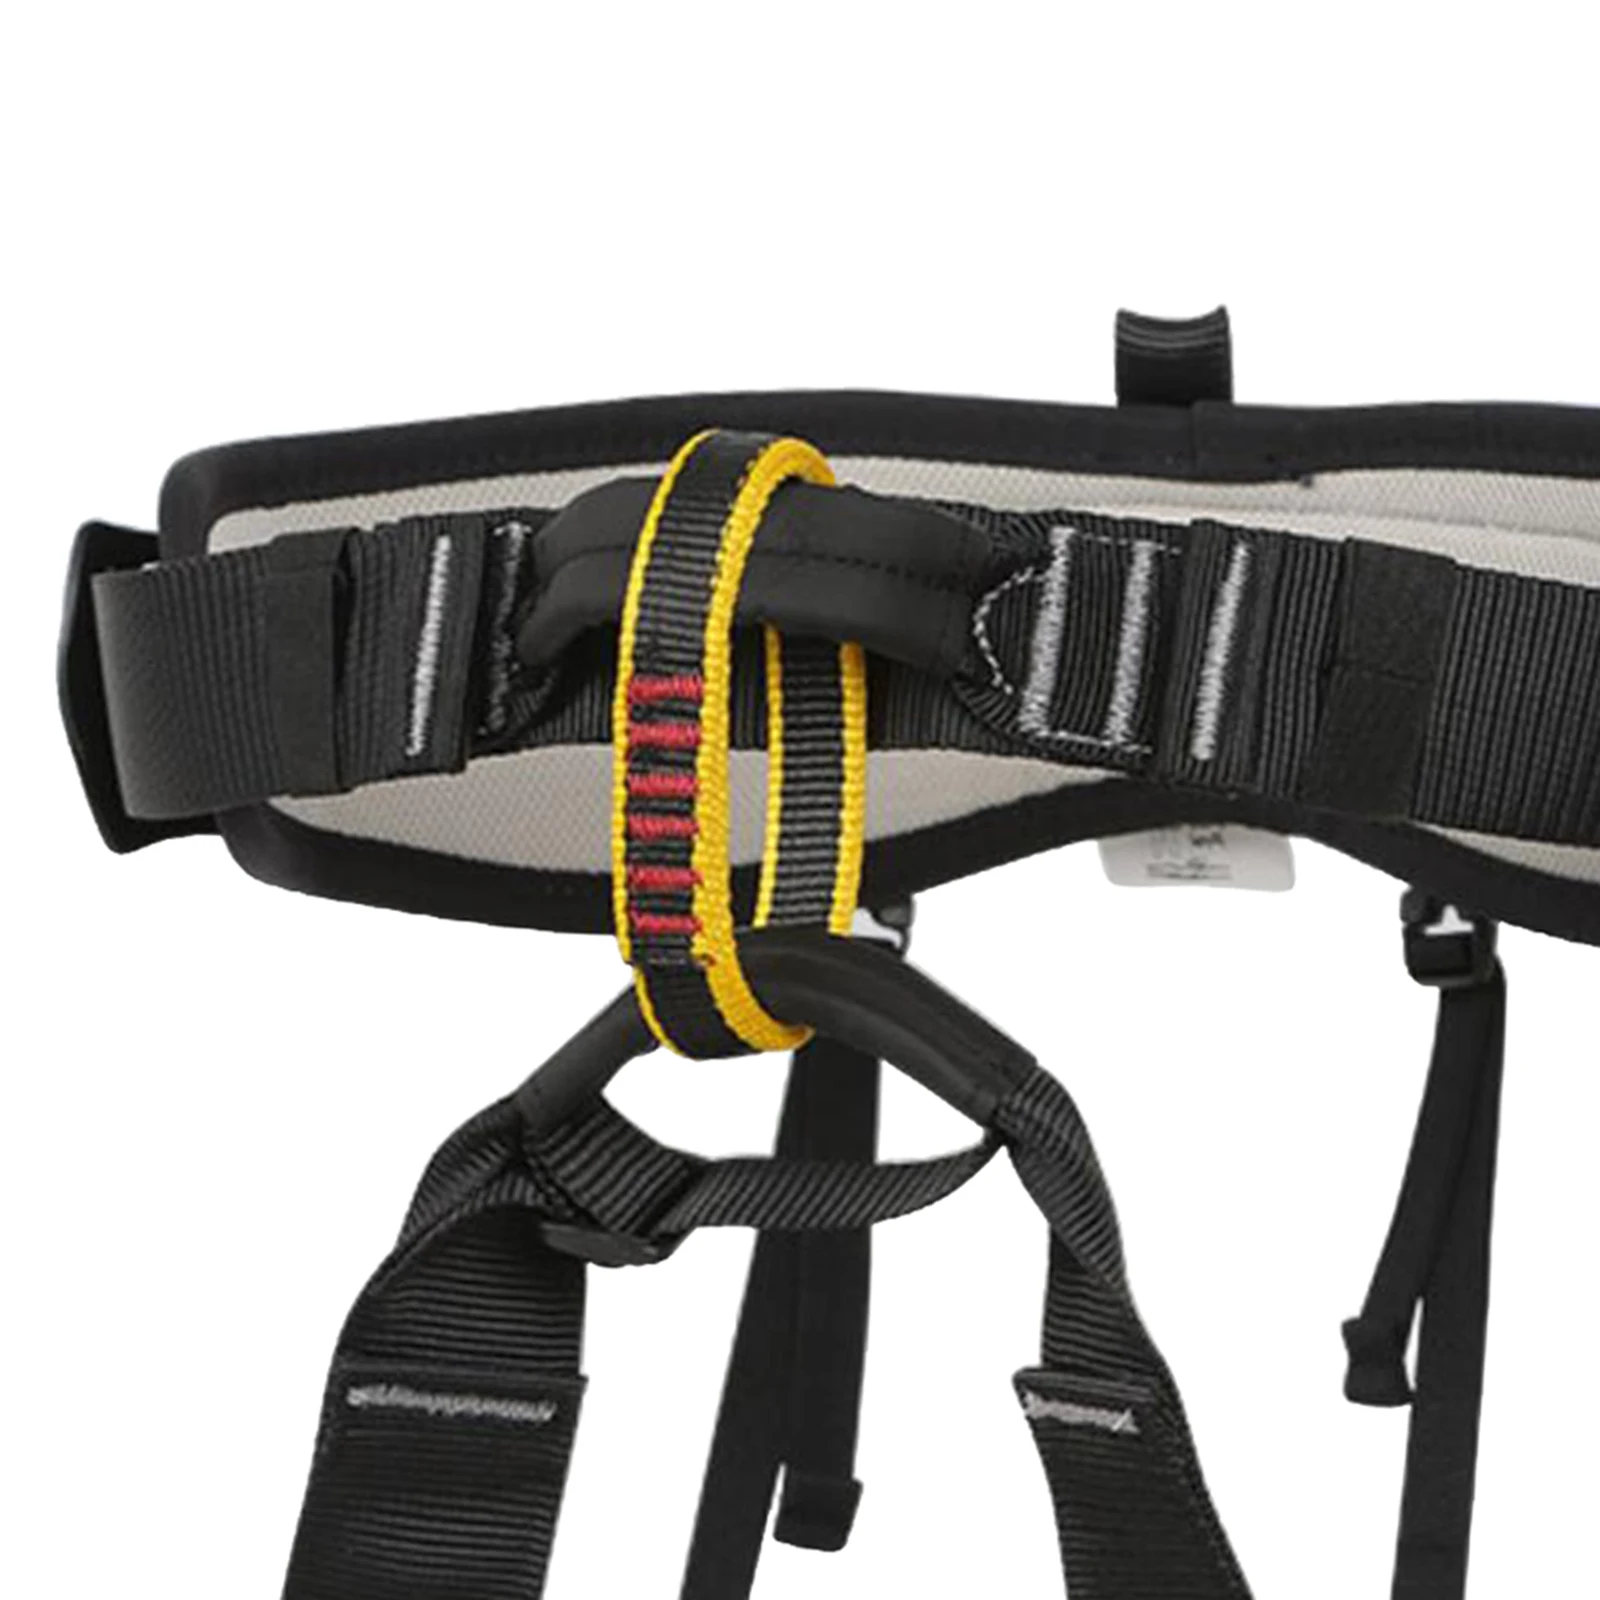 Adjustable Harness E1B6 Outdoor Rescue Rock Climbing Belt Safety Rappelling HOT 